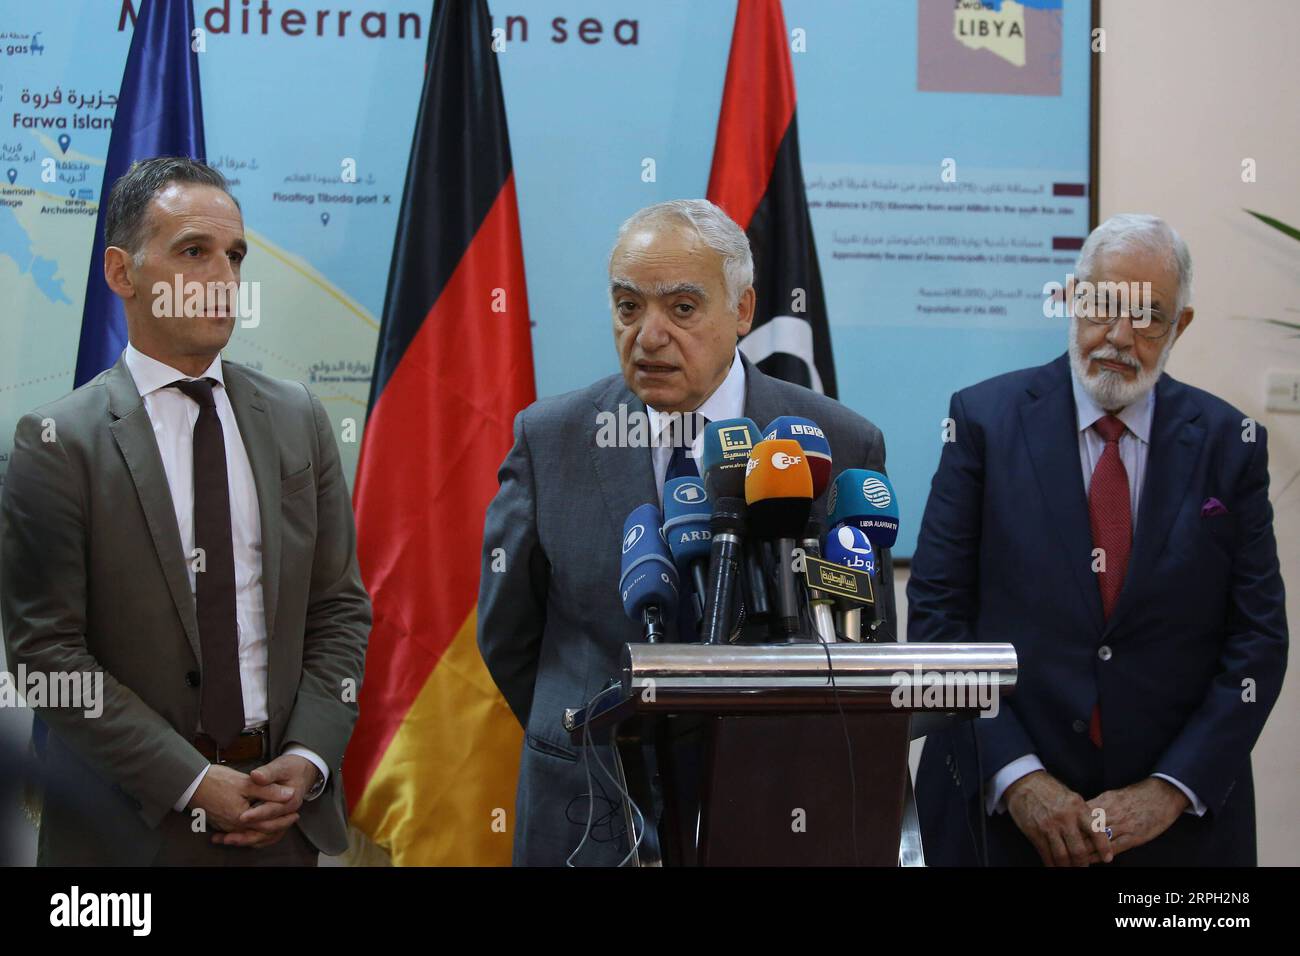 191027 -- ZUWARA LIBYA, Oct. 27, 2019 Xinhua -- United Nations Special Envoy to Libya Ghassan Salame C speaks at a press conference in Zuwara, Libya, Oct. 27, 2019. German Foreign Minister Heiko Maas on Sunday stressed Germany s support for the efforts of the UN Special Envoy to Libya Ghassan Salame that aim to end the current Libyan crisis. Photo by Hamza Turkia/Xinhua LIBYA-ZUWARA-UN ENVOY-GERMAN FM-VISIT PUBLICATIONxNOTxINxCHN Stock Photo